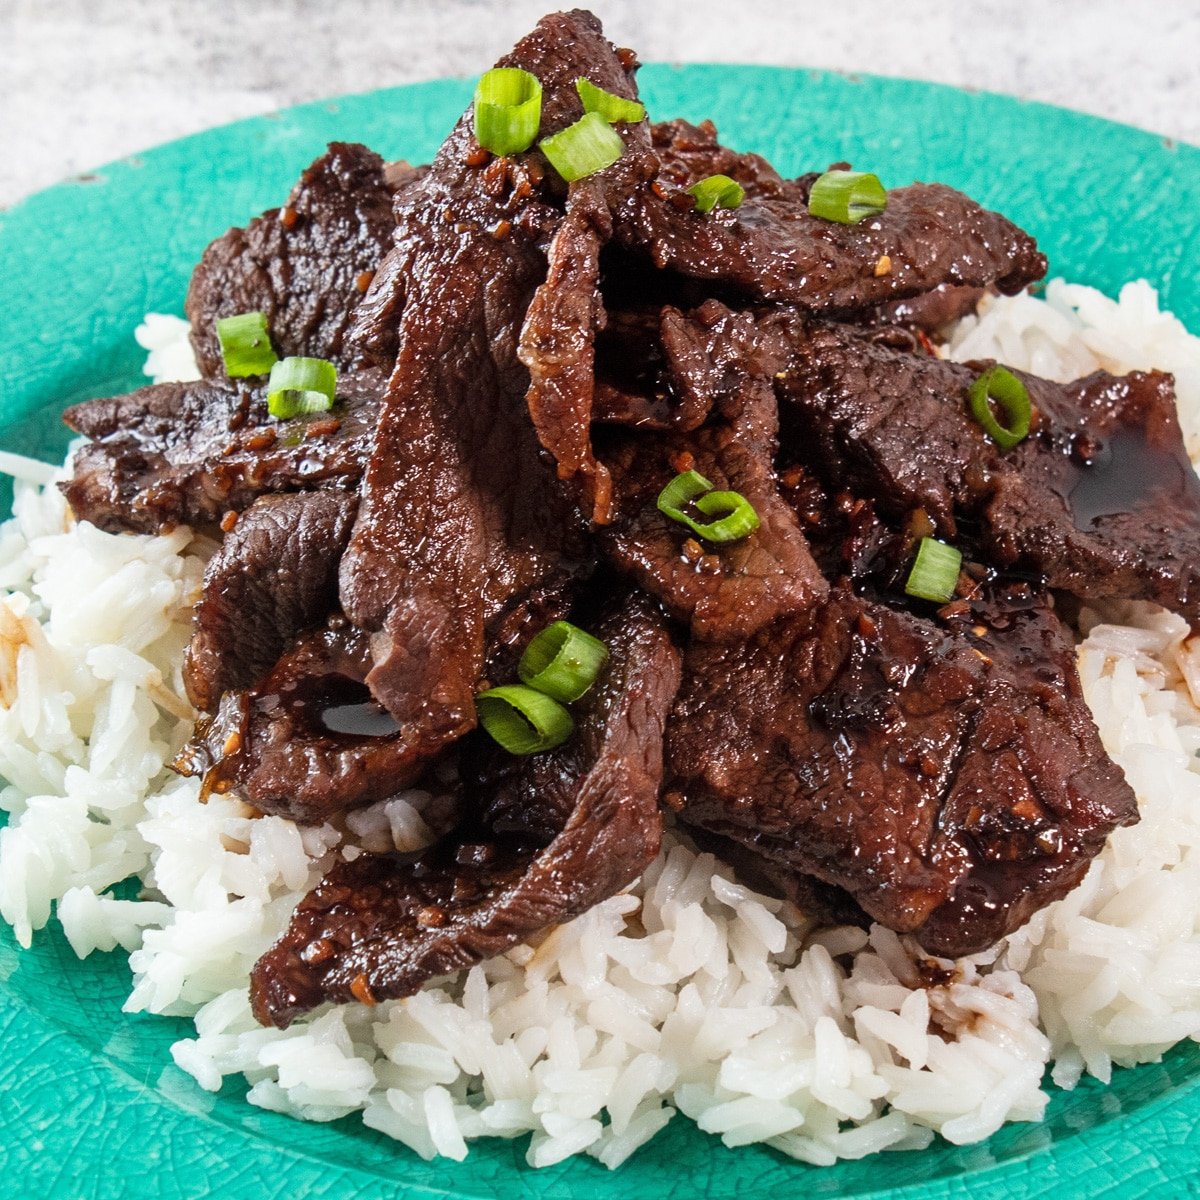 Tasty prime rib mongolian beef served on a bed of white rice.